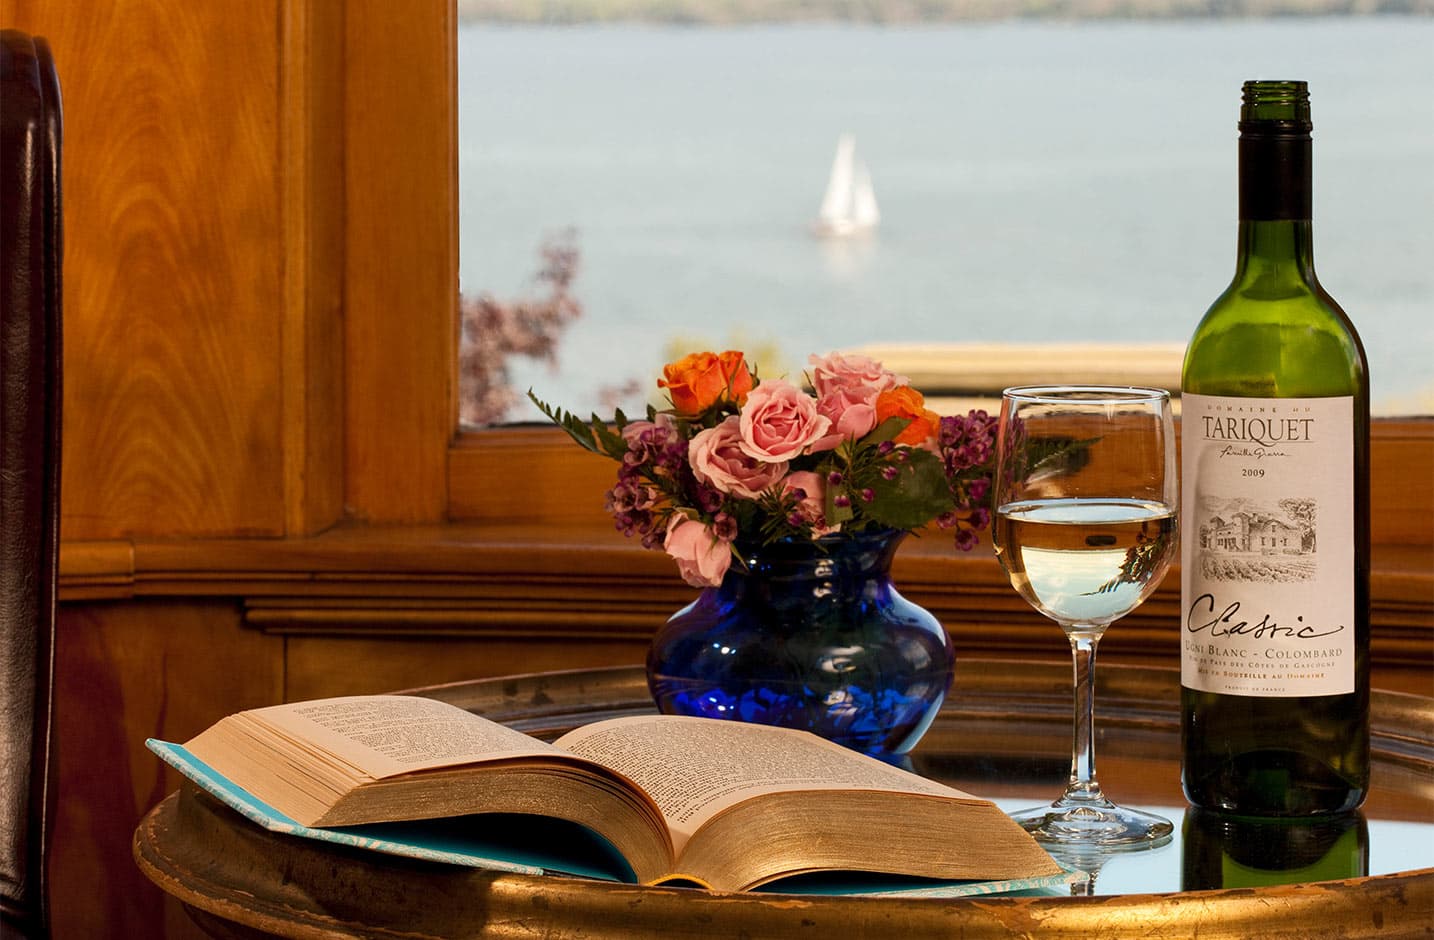 Open Book with glass of wine, wine bottle, and flowers